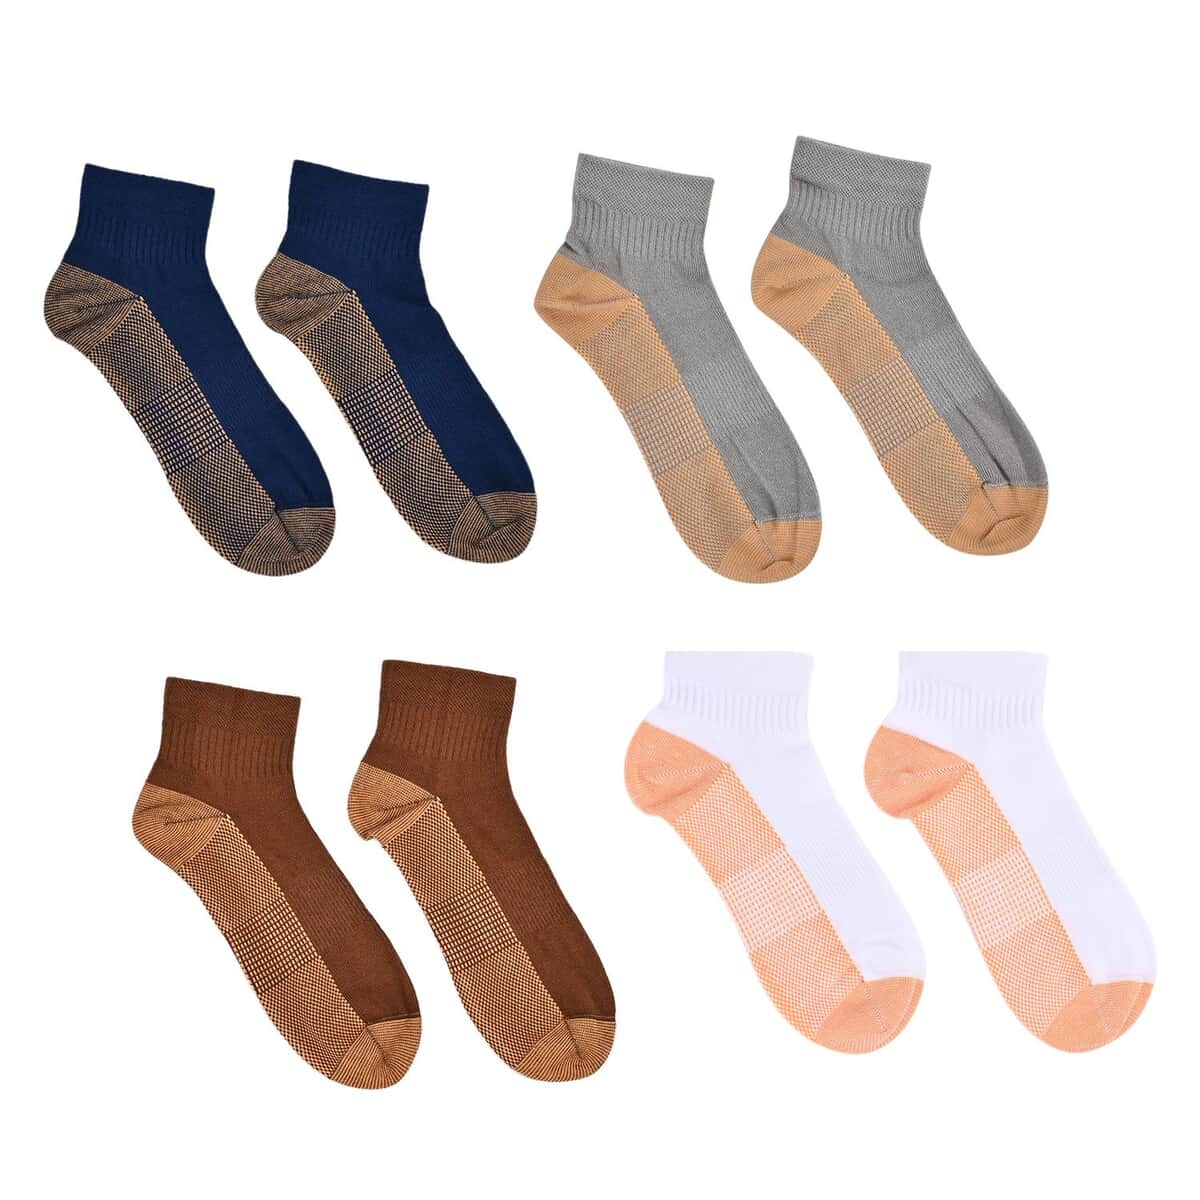 Set of 4 Pairs of Ankle Length Odor Free Copper Compression Socks For Men And Women, Premium Material Moisture Wicking Unisex Copper Infused Socks - Gray, Brown, Blue and White (S/M) image number 0